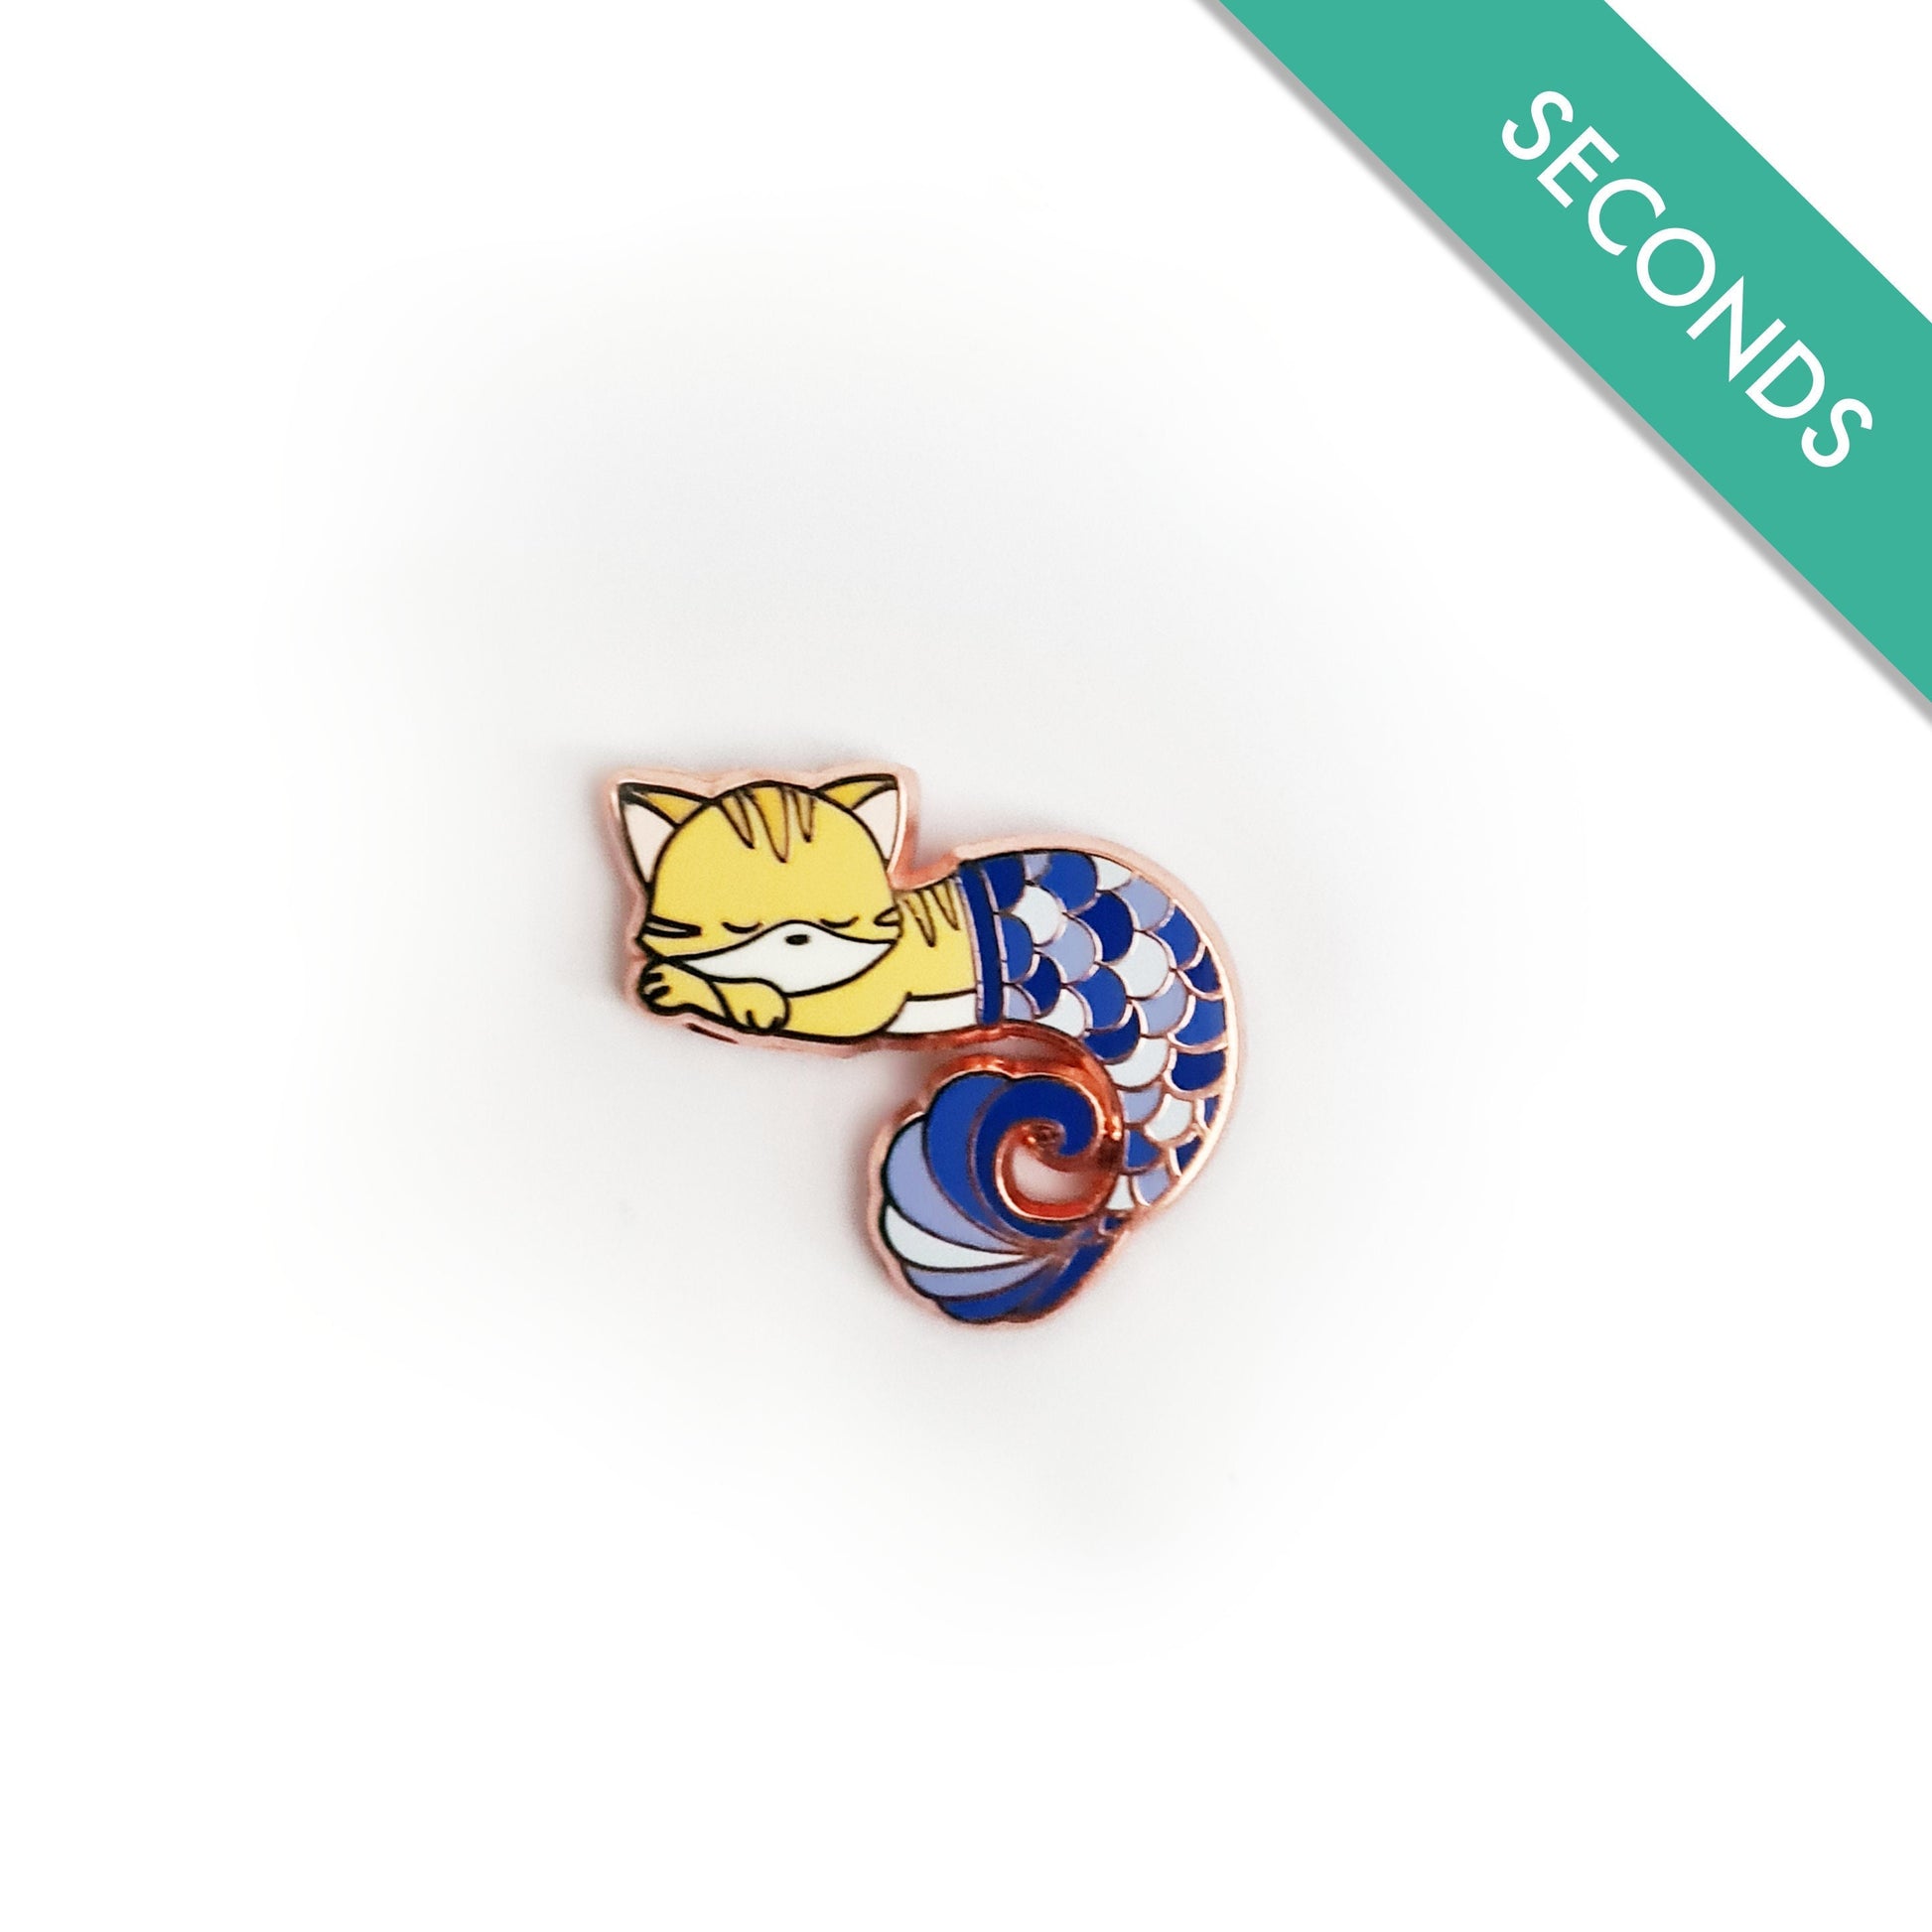 Purrmaid V Pin - Pin Seconds - Small Enamel Pin (Ginger Tabby Cat with Violet/Blue Tail)